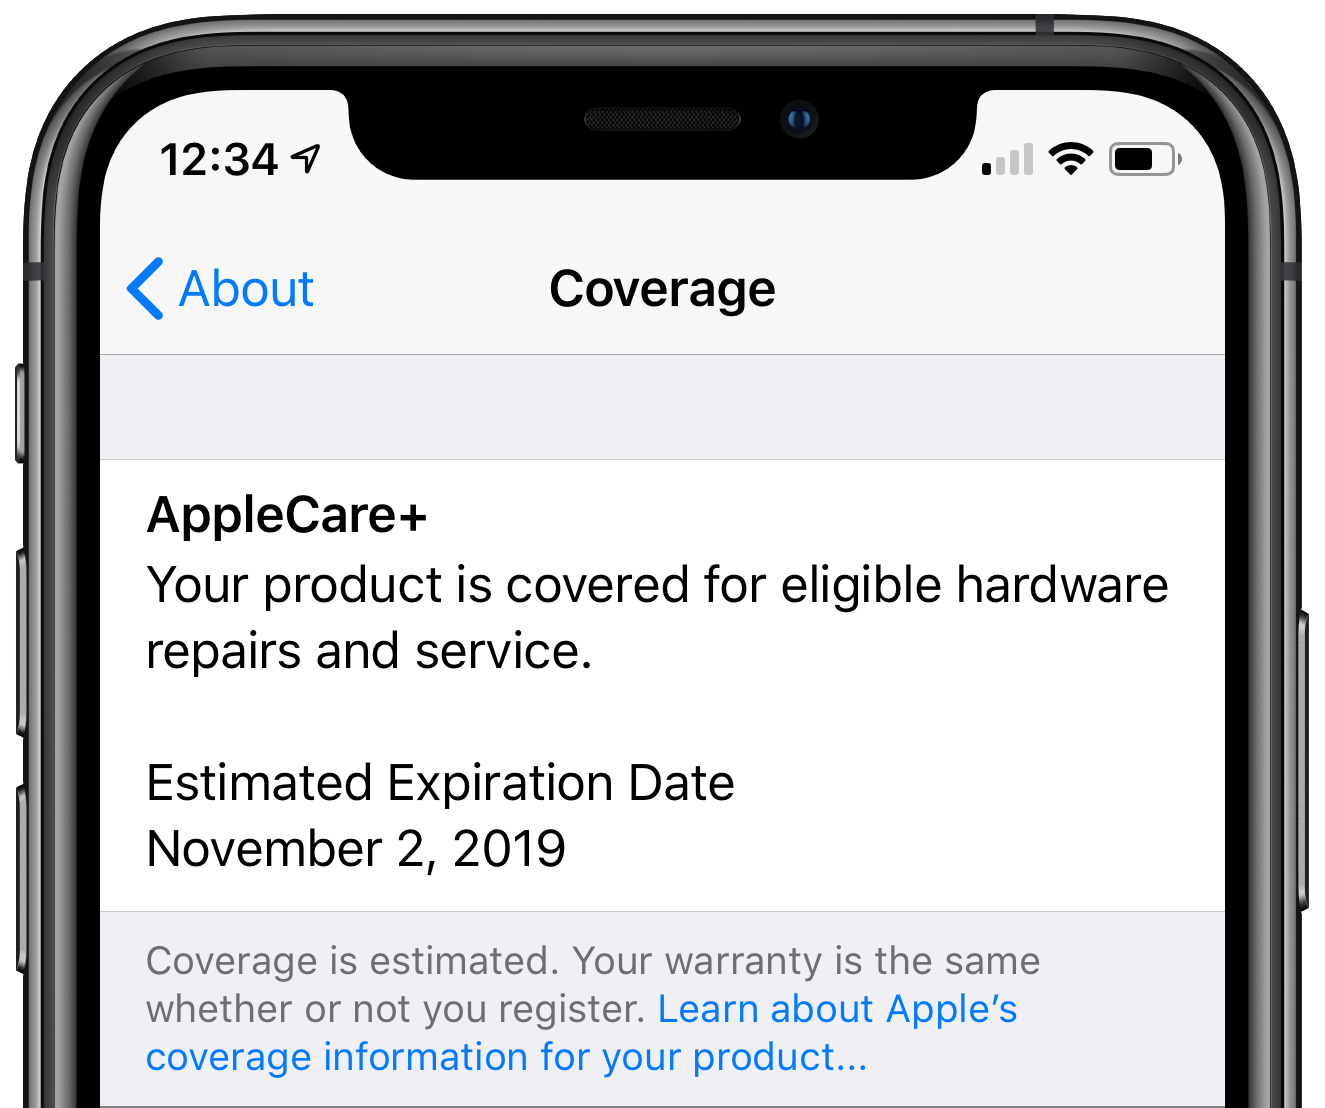 can i buy applecare for macbook pro after 1 year warranty